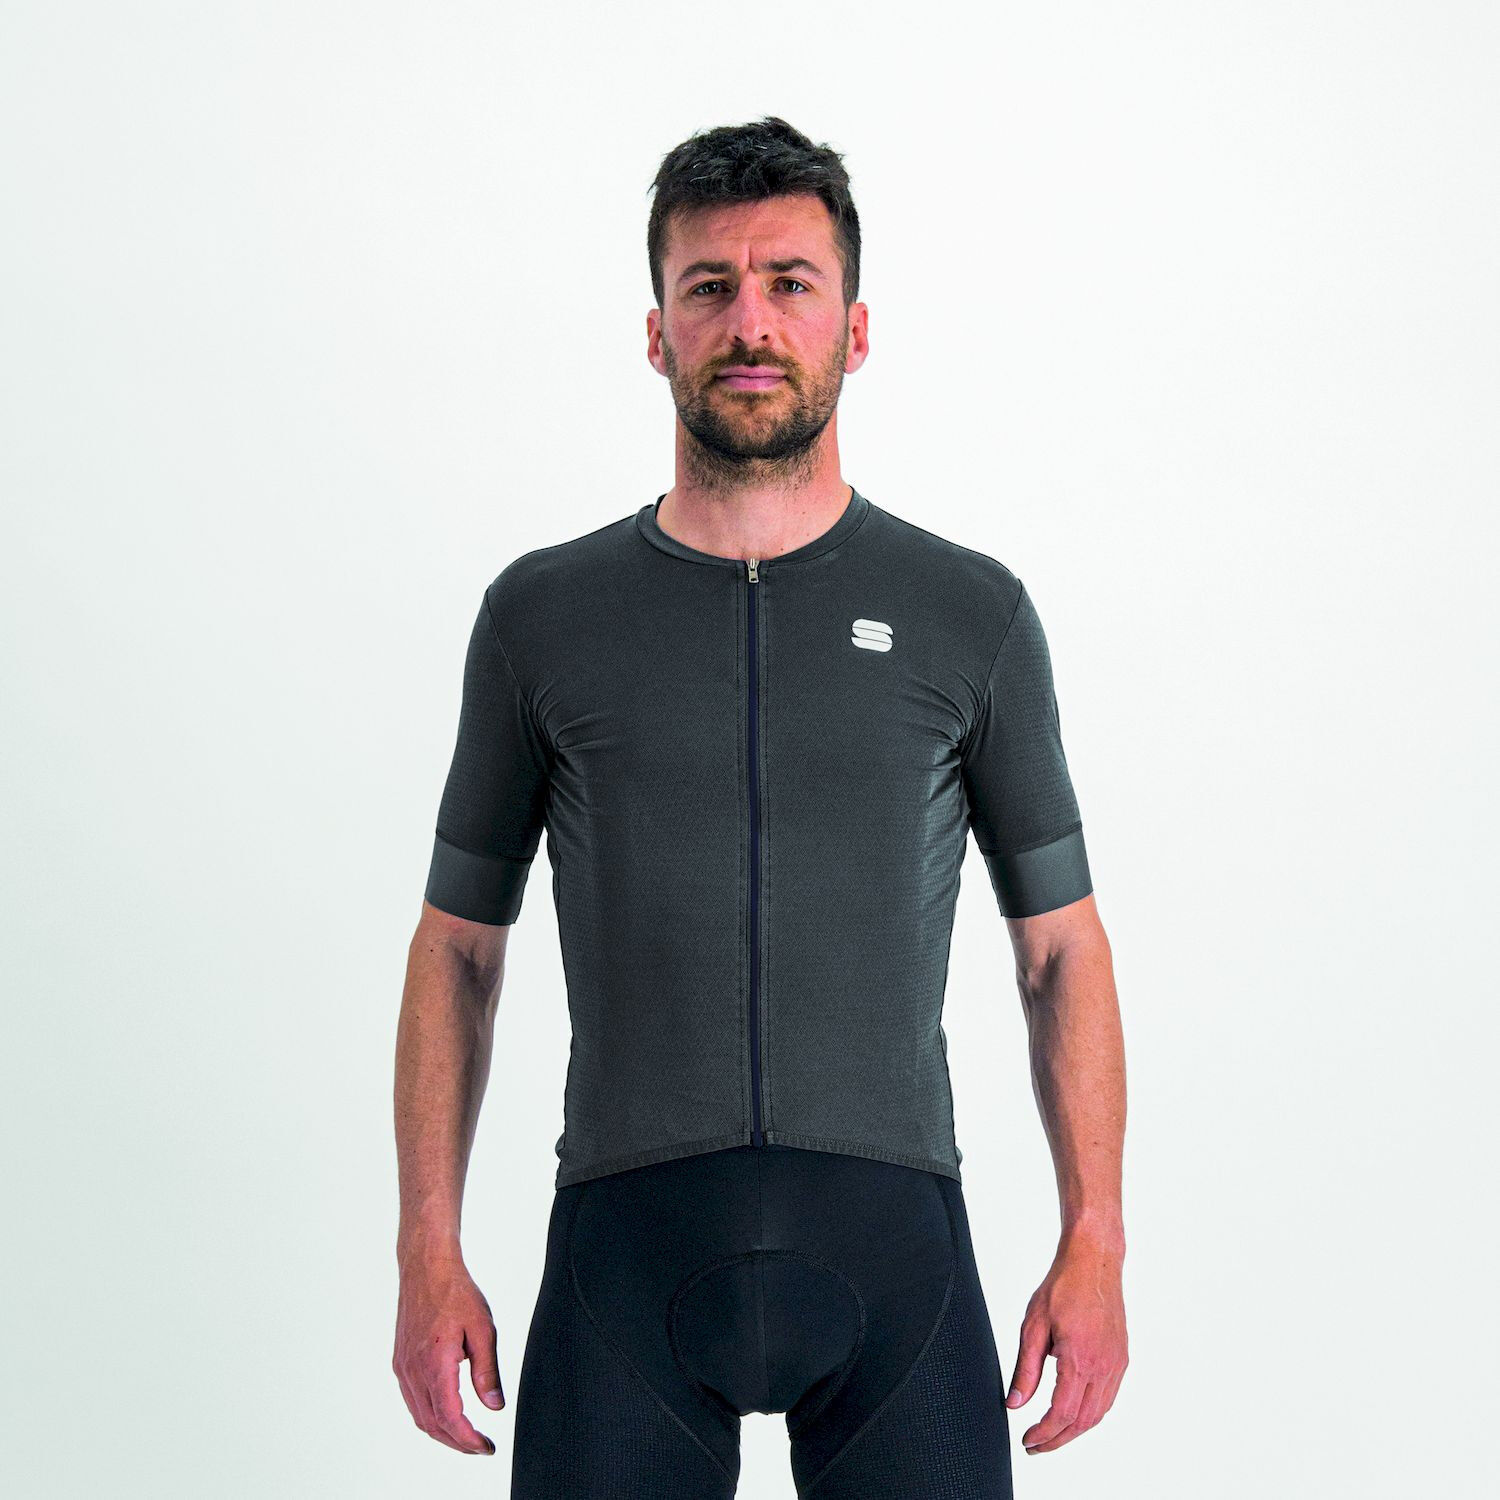 Sportful Monocrom Jersey - Maillot ciclismo - Hombre